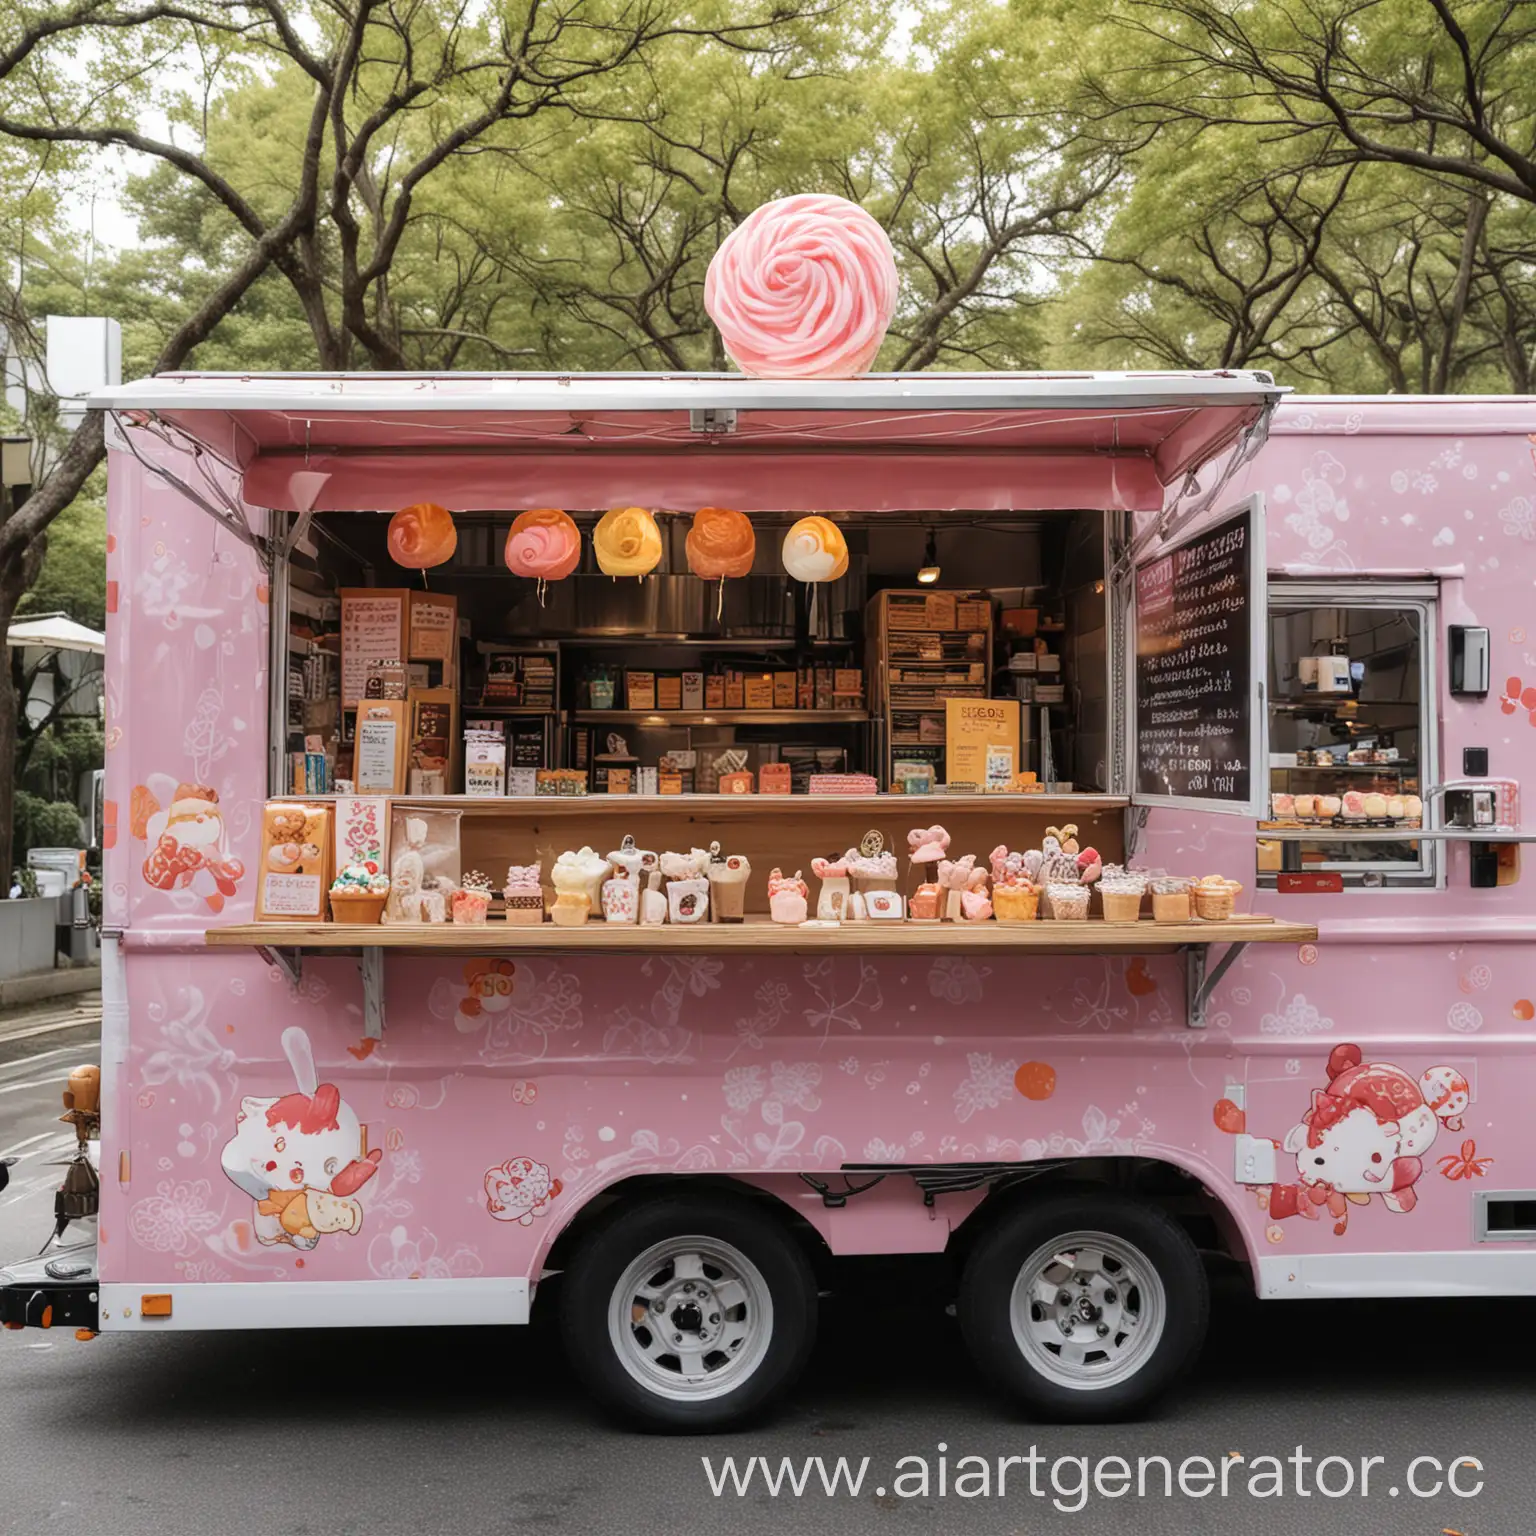 Japanese-Sweets-Food-Truck-Colorful-Street-Vendor-Selling-Traditional-Treats